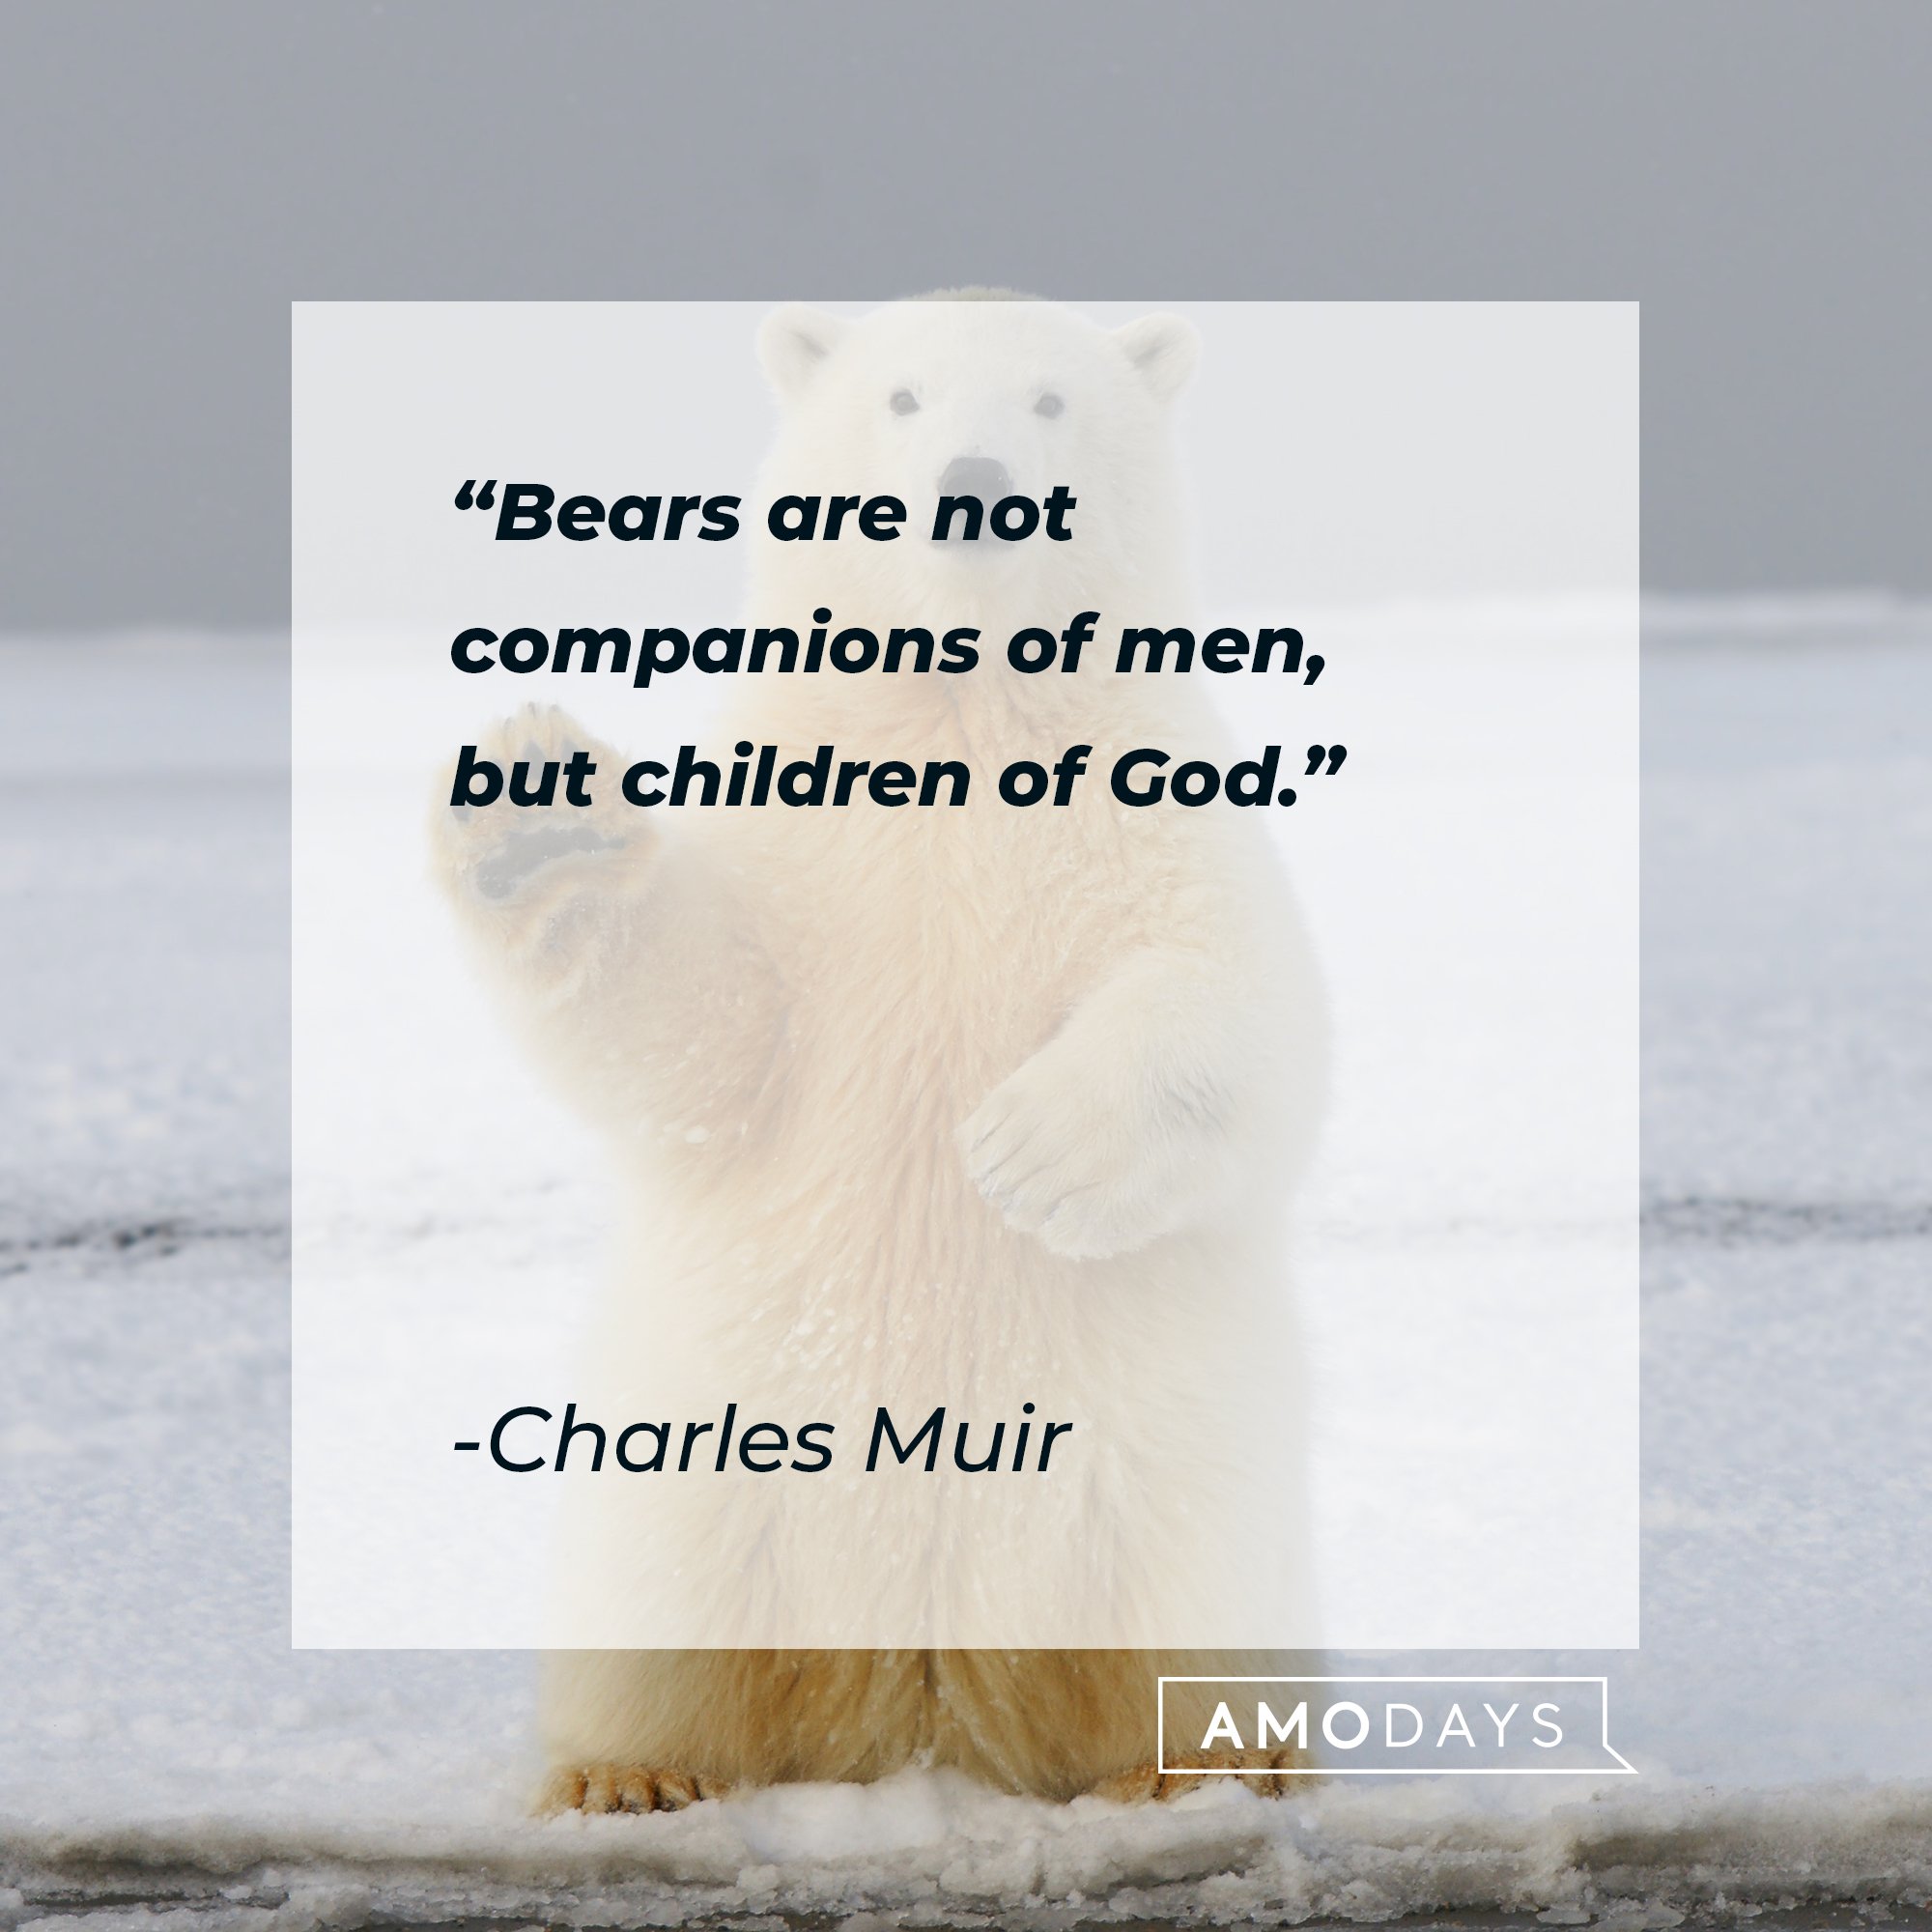 Charles Muir’s quote: "Bears are not companions of men, but children of God." | Image: AmoDays